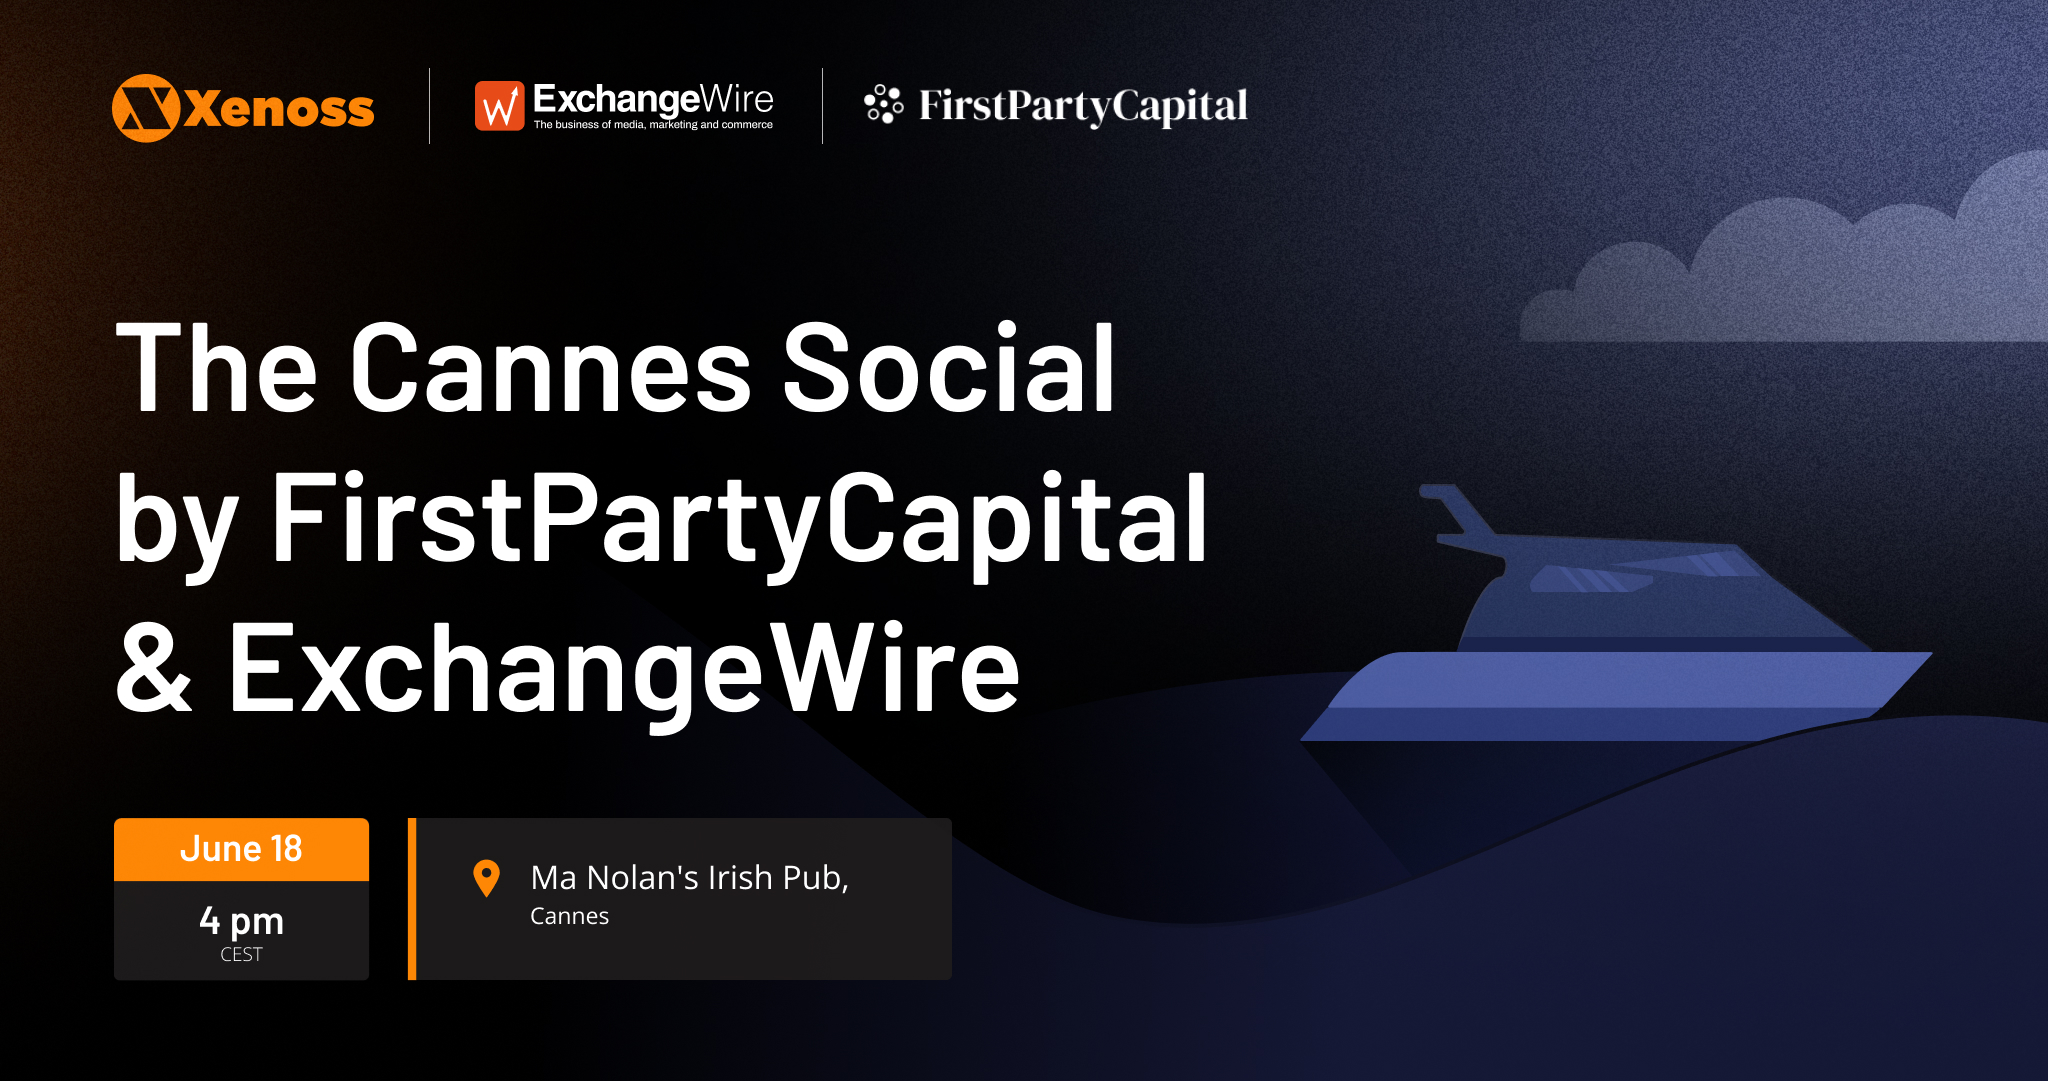 Xenoss is co-sponsoring The Cannes Social with FirstPartyCapital and ExchangeWire on June 18th in La Croisette.